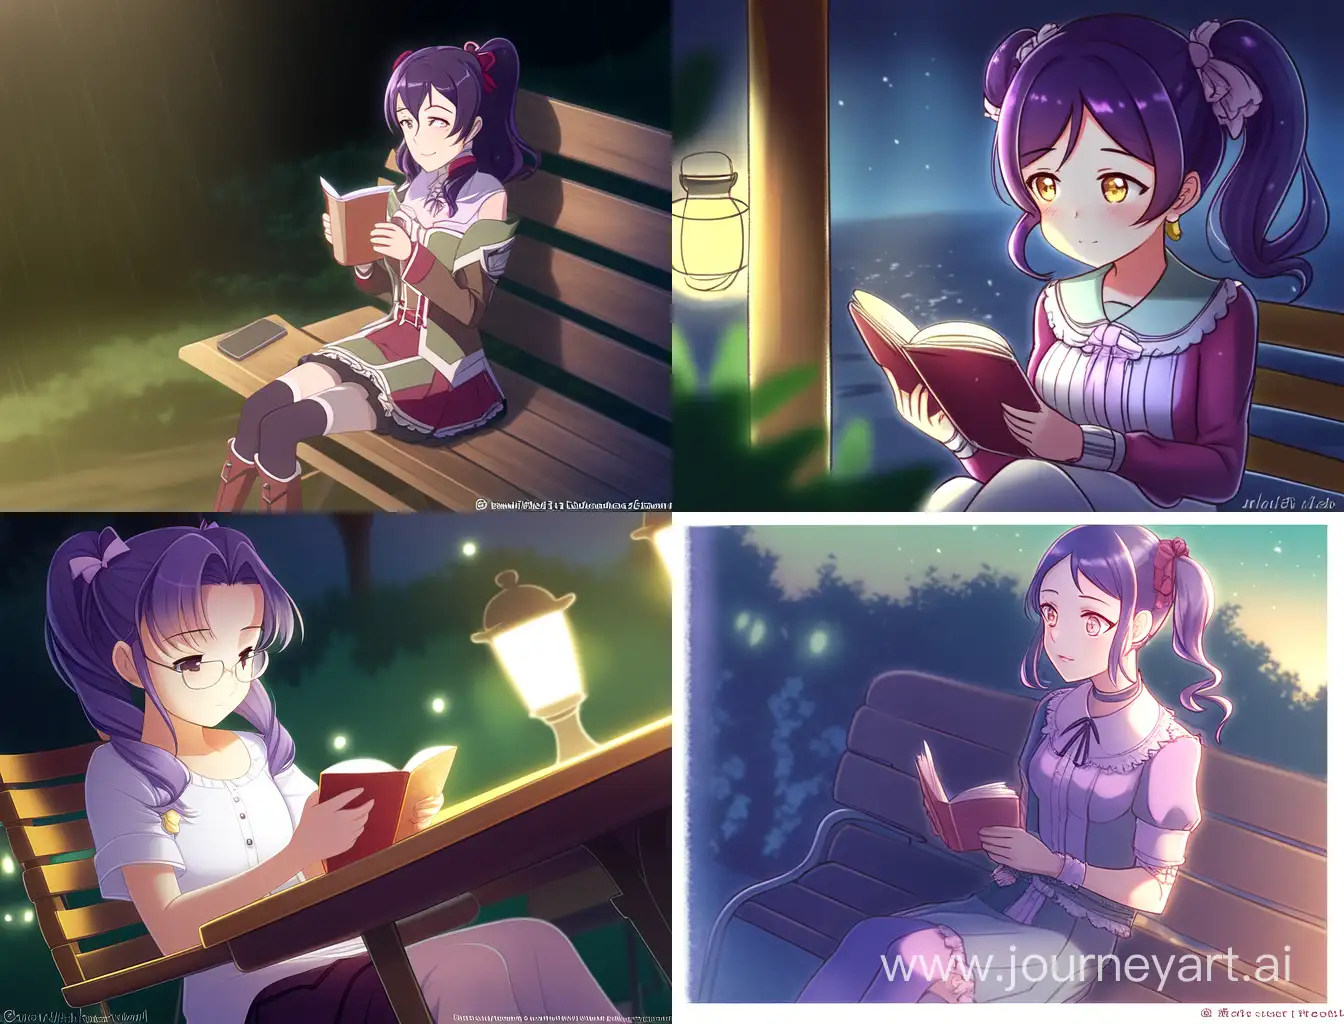 Enchanting-Evening-Read-with-Girl-in-Dark-Purple-Pigtails